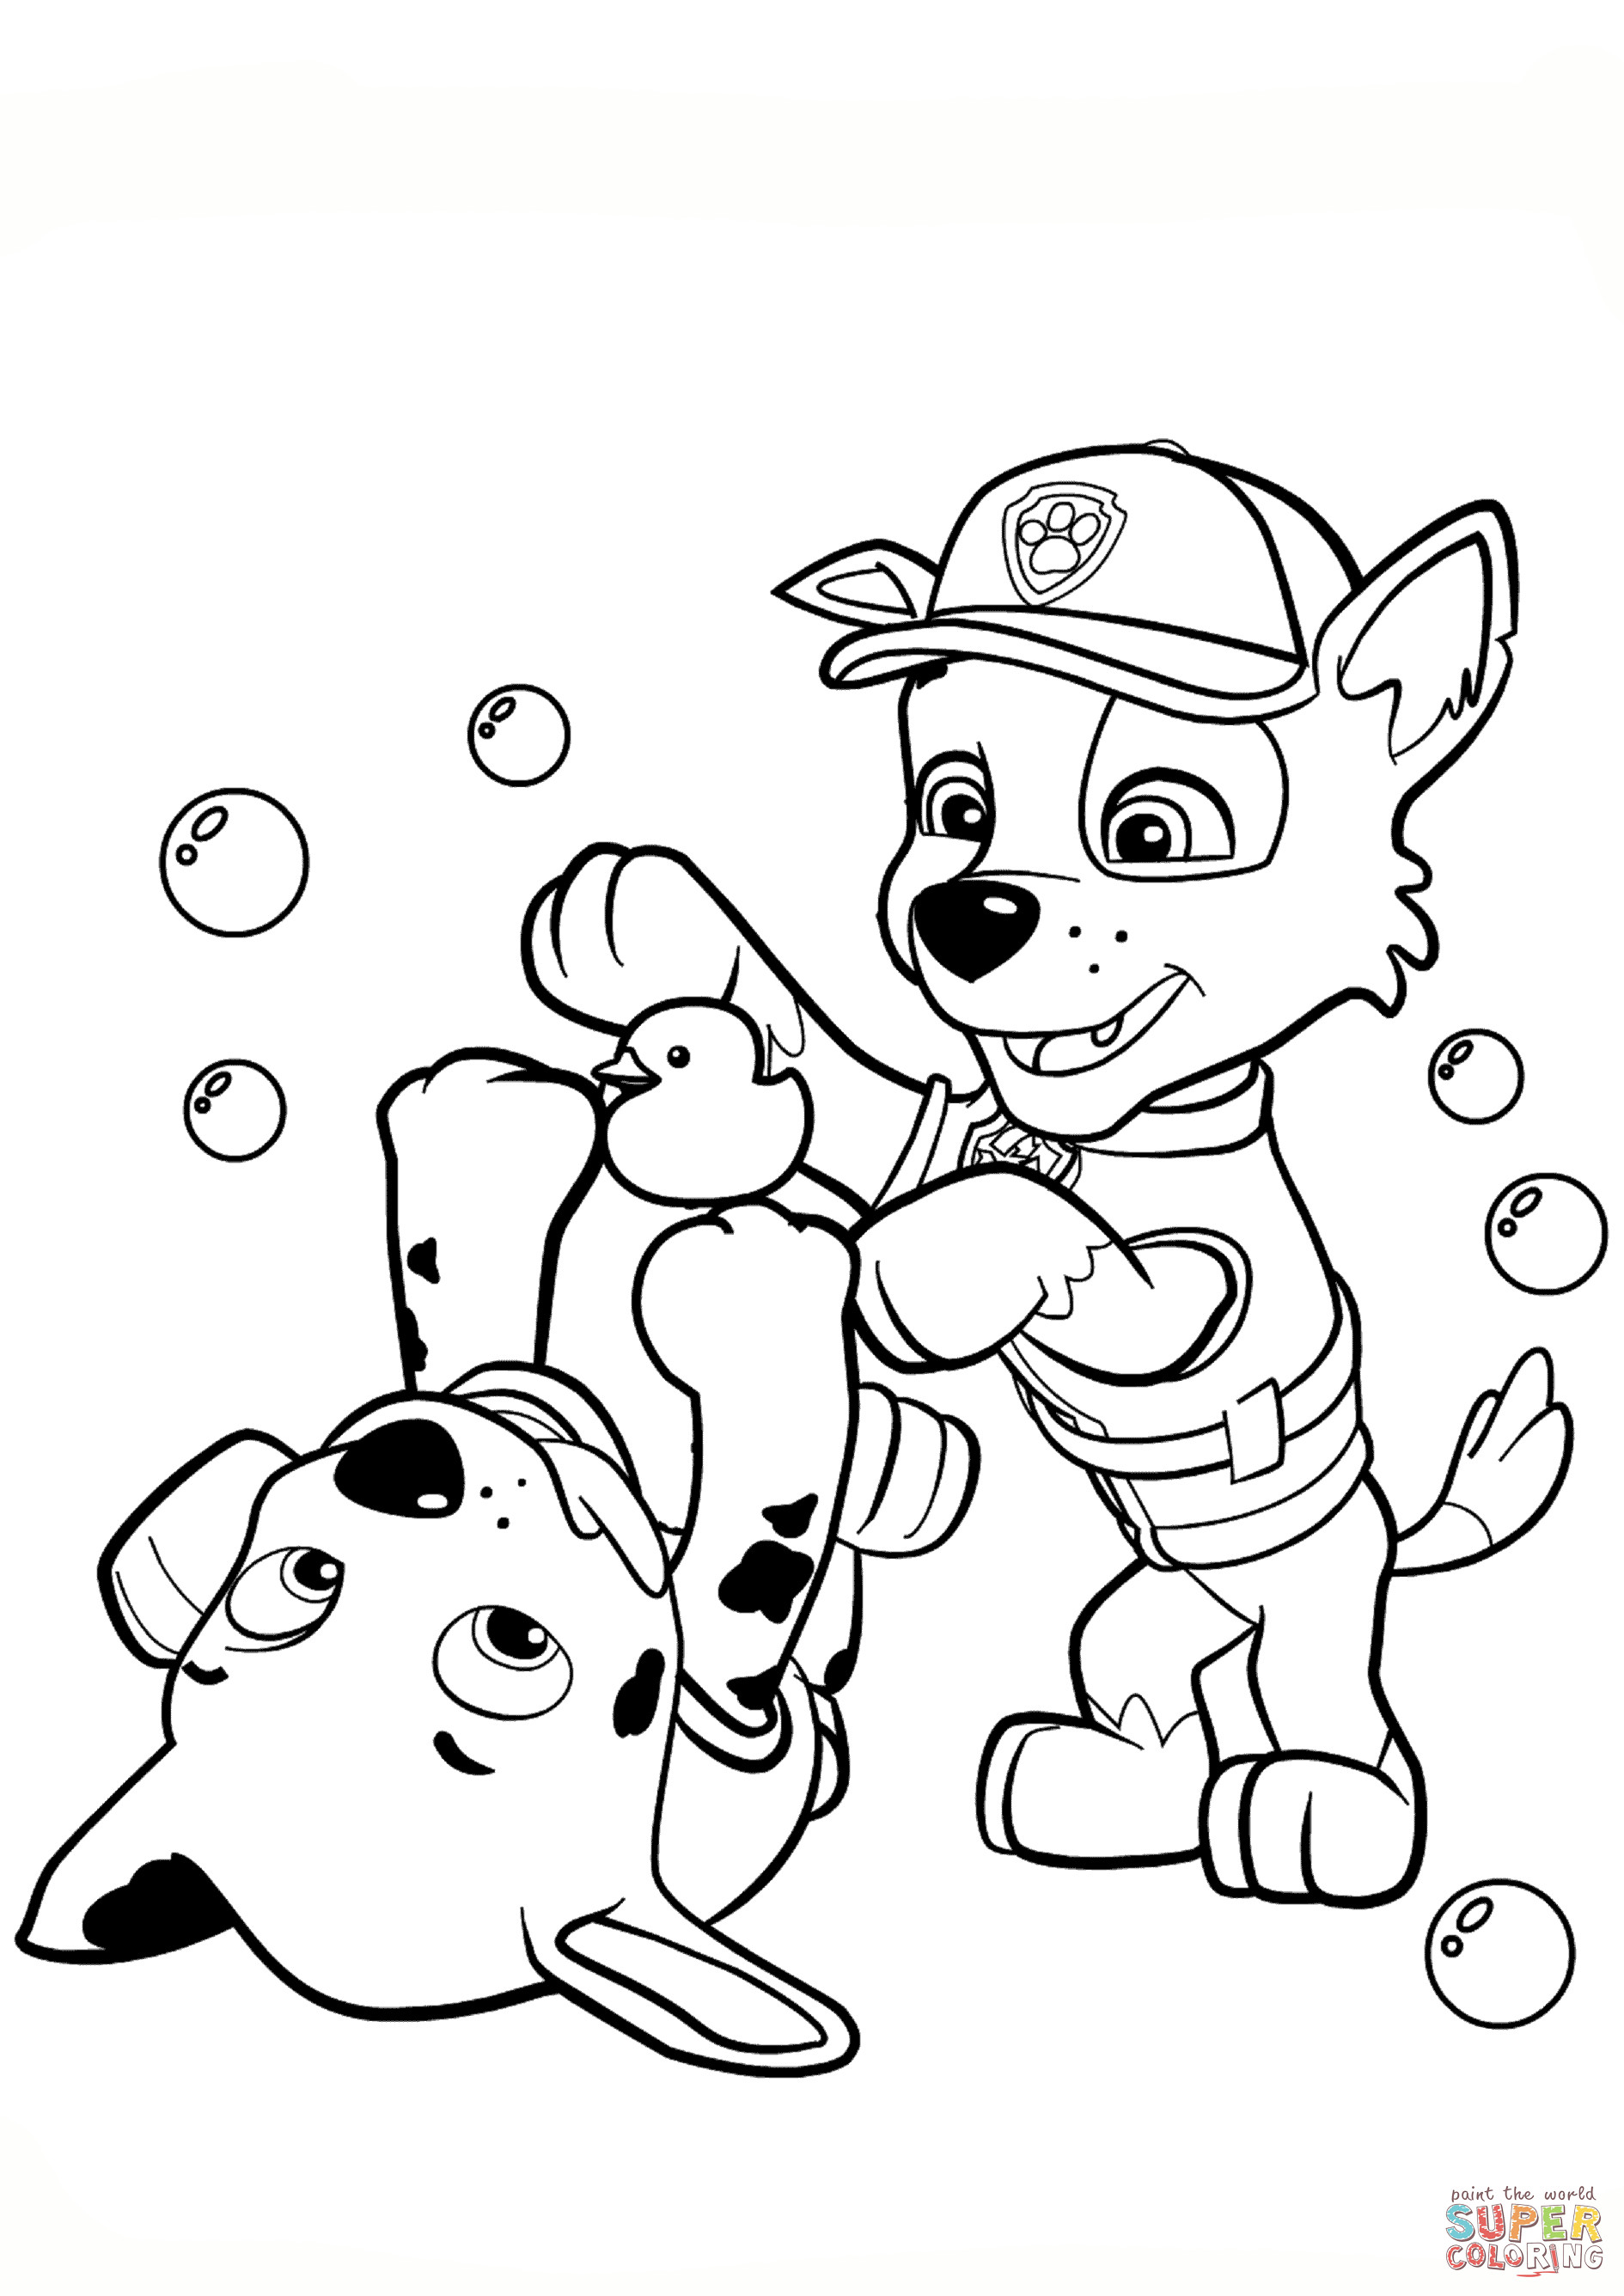 Free Printable Coloring Pages Paw Patrol
 Paw Patrol Rocky and Marshall coloring page